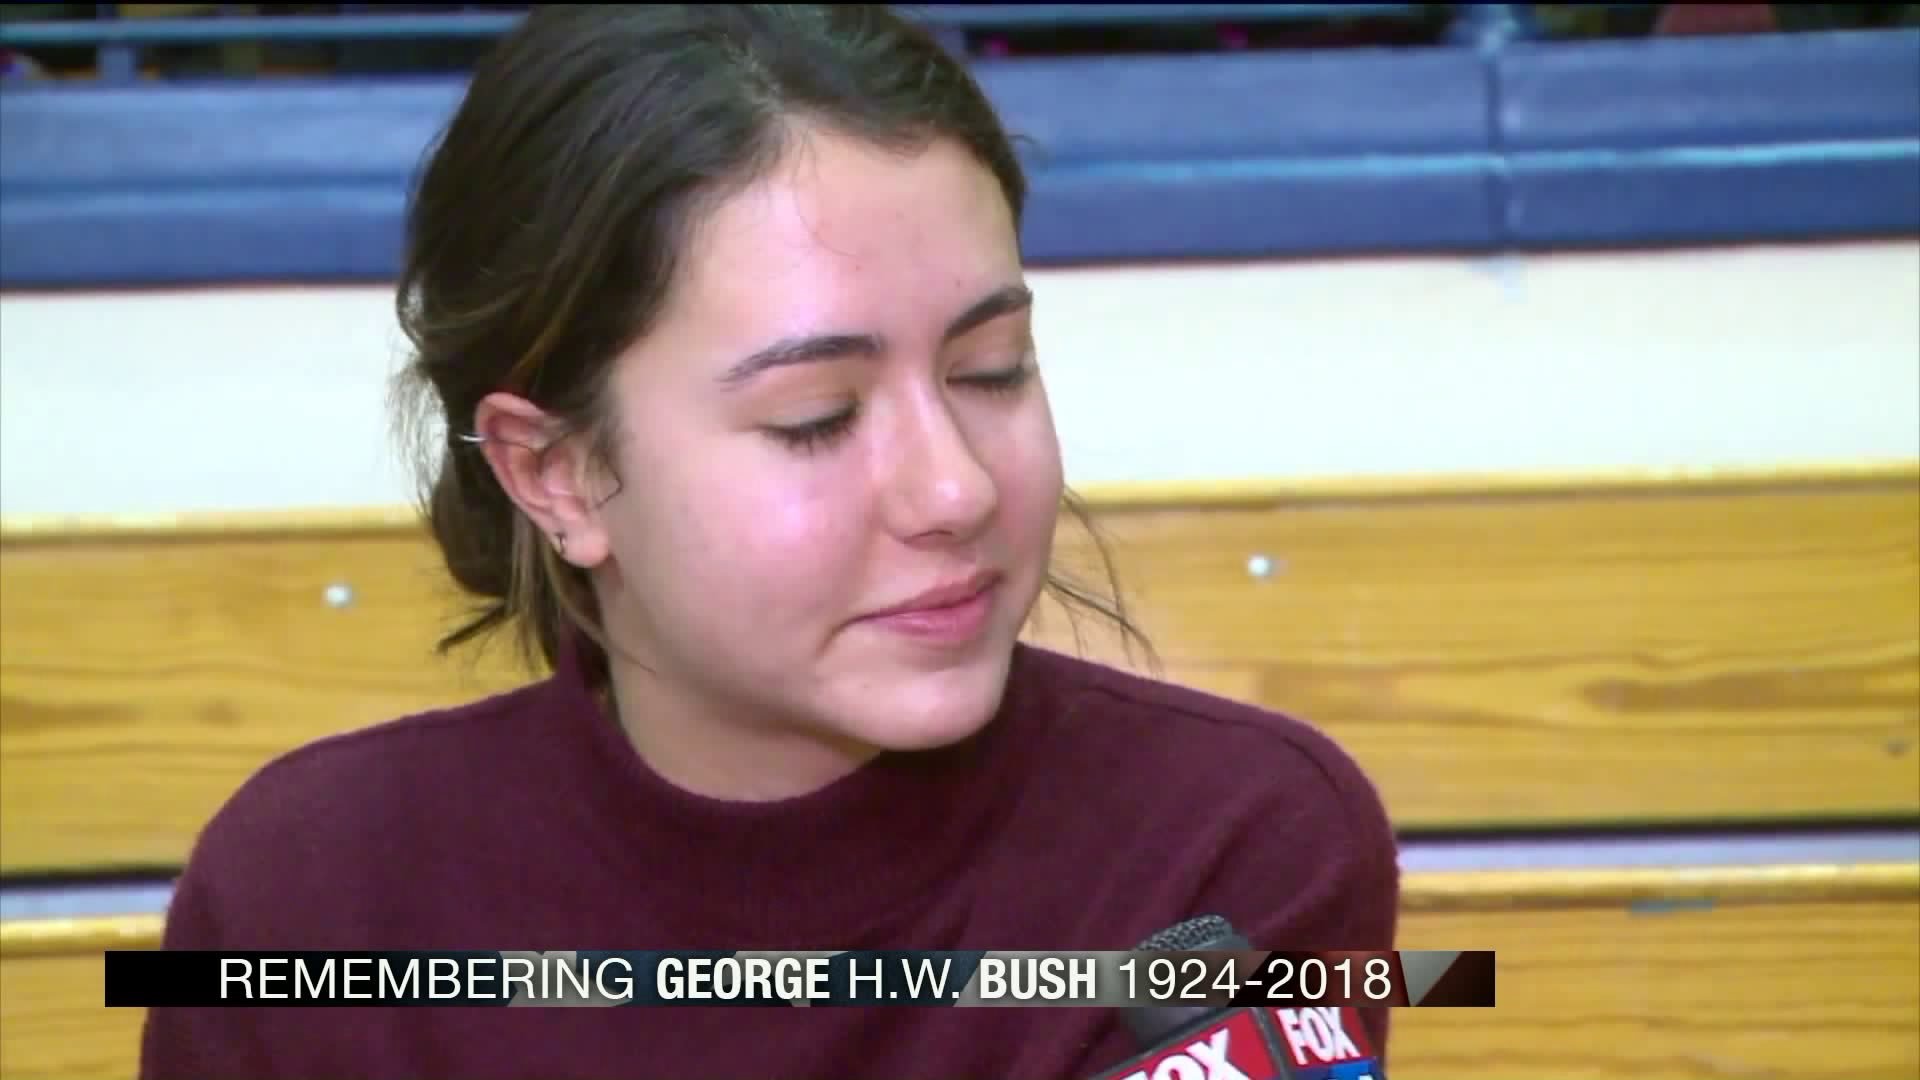 Moment of silence held at Yale basketball game for alumni George H.W. Bush